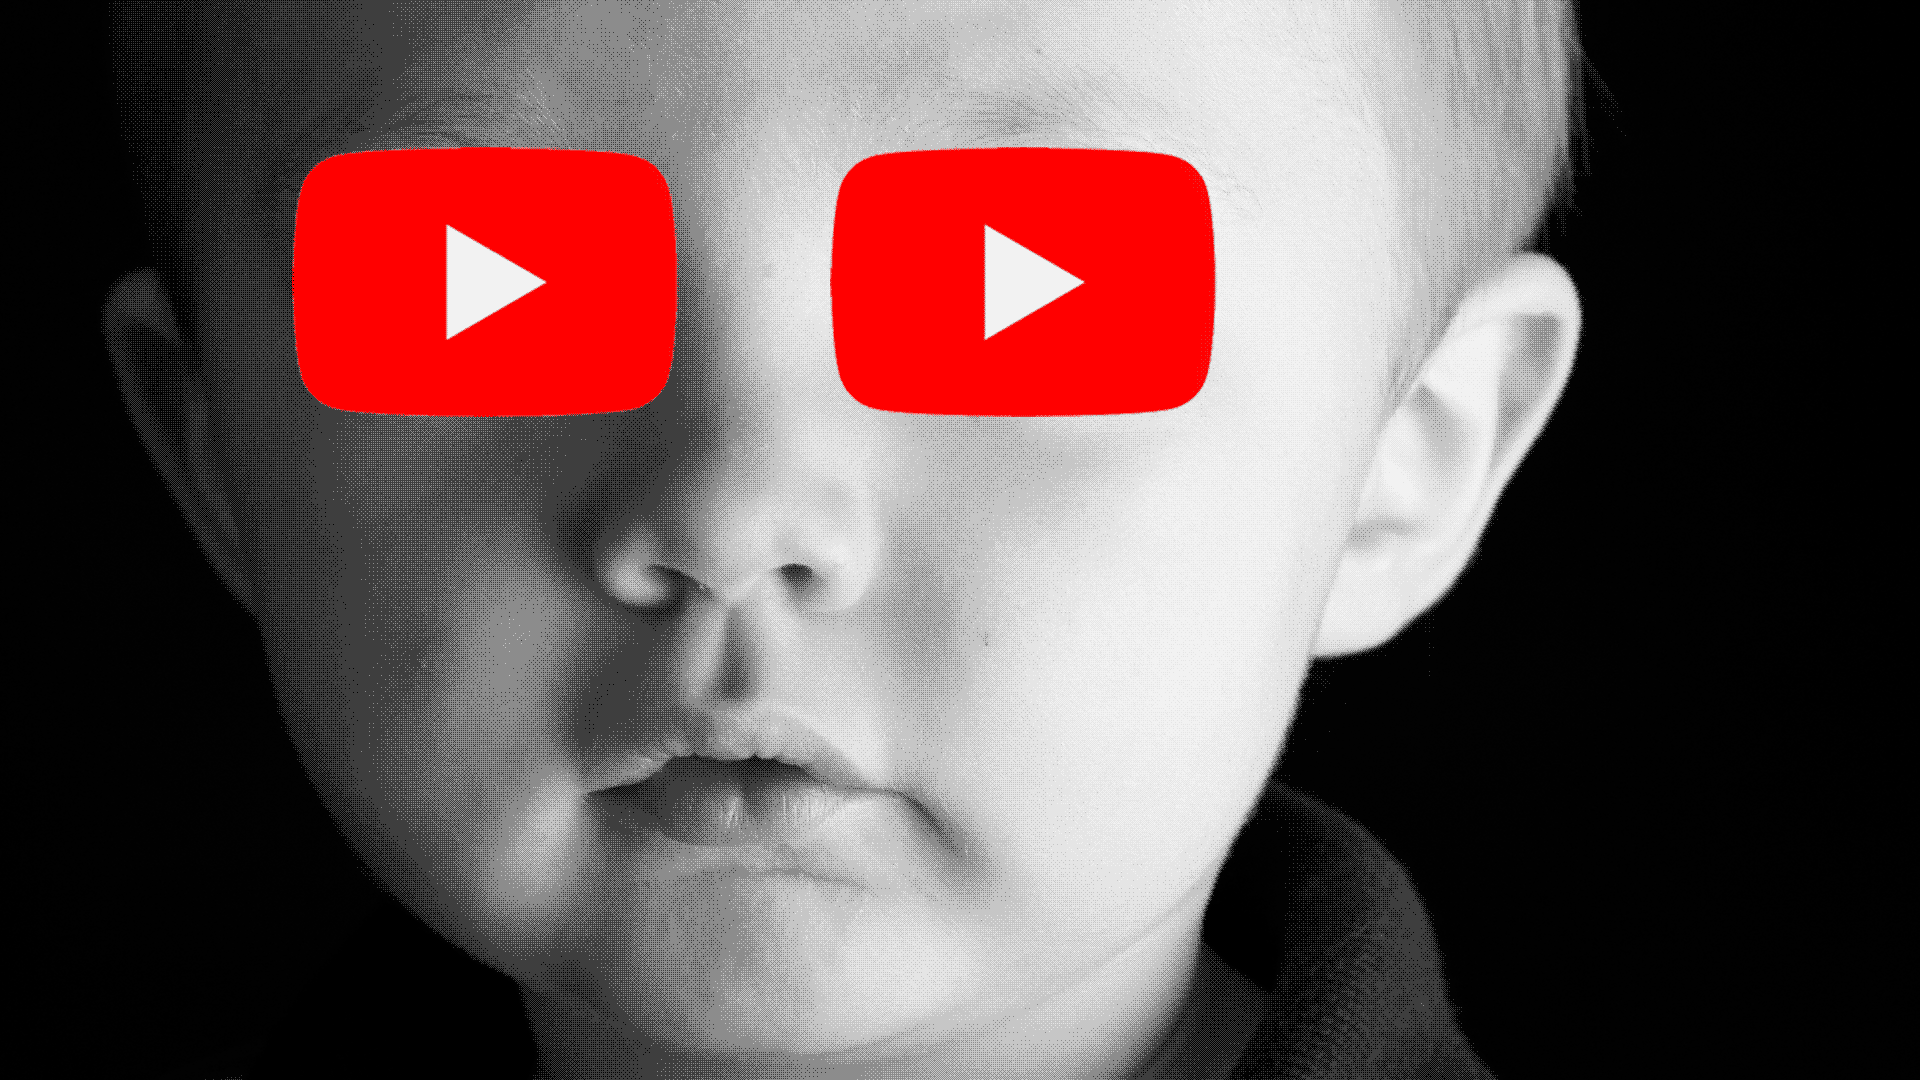 Google to pay $170M over claim that YouTube violated child privacy law - Axios